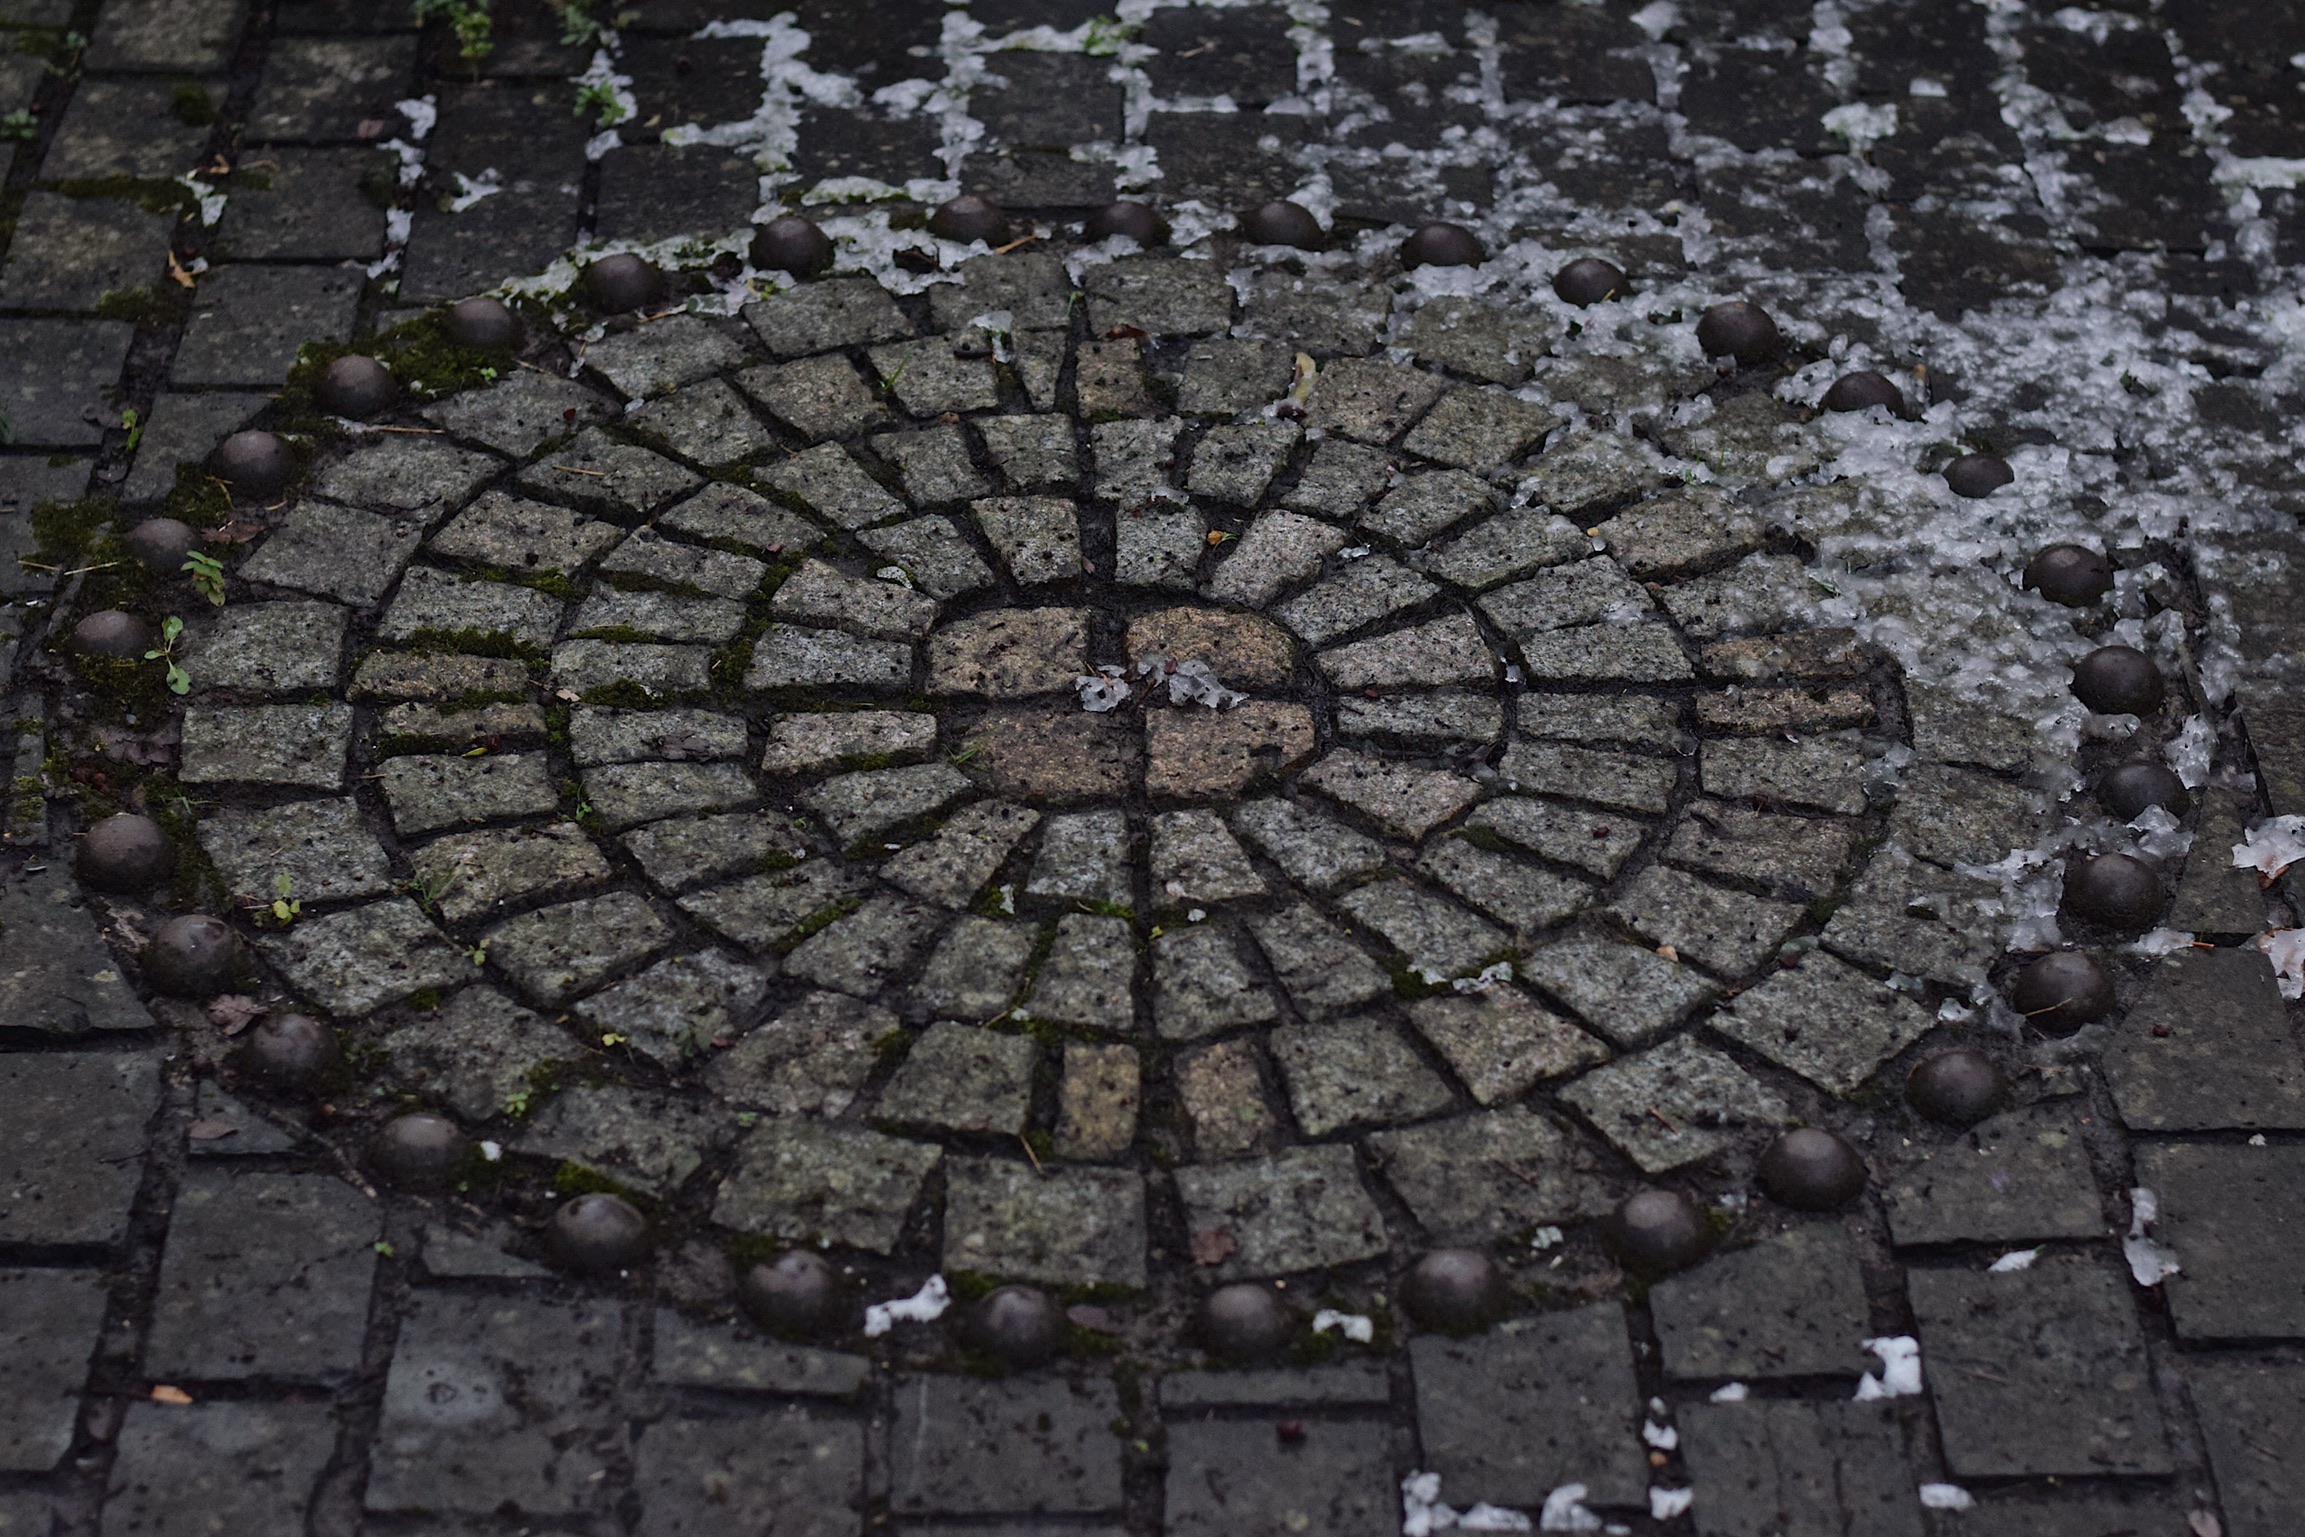 A circle with paving